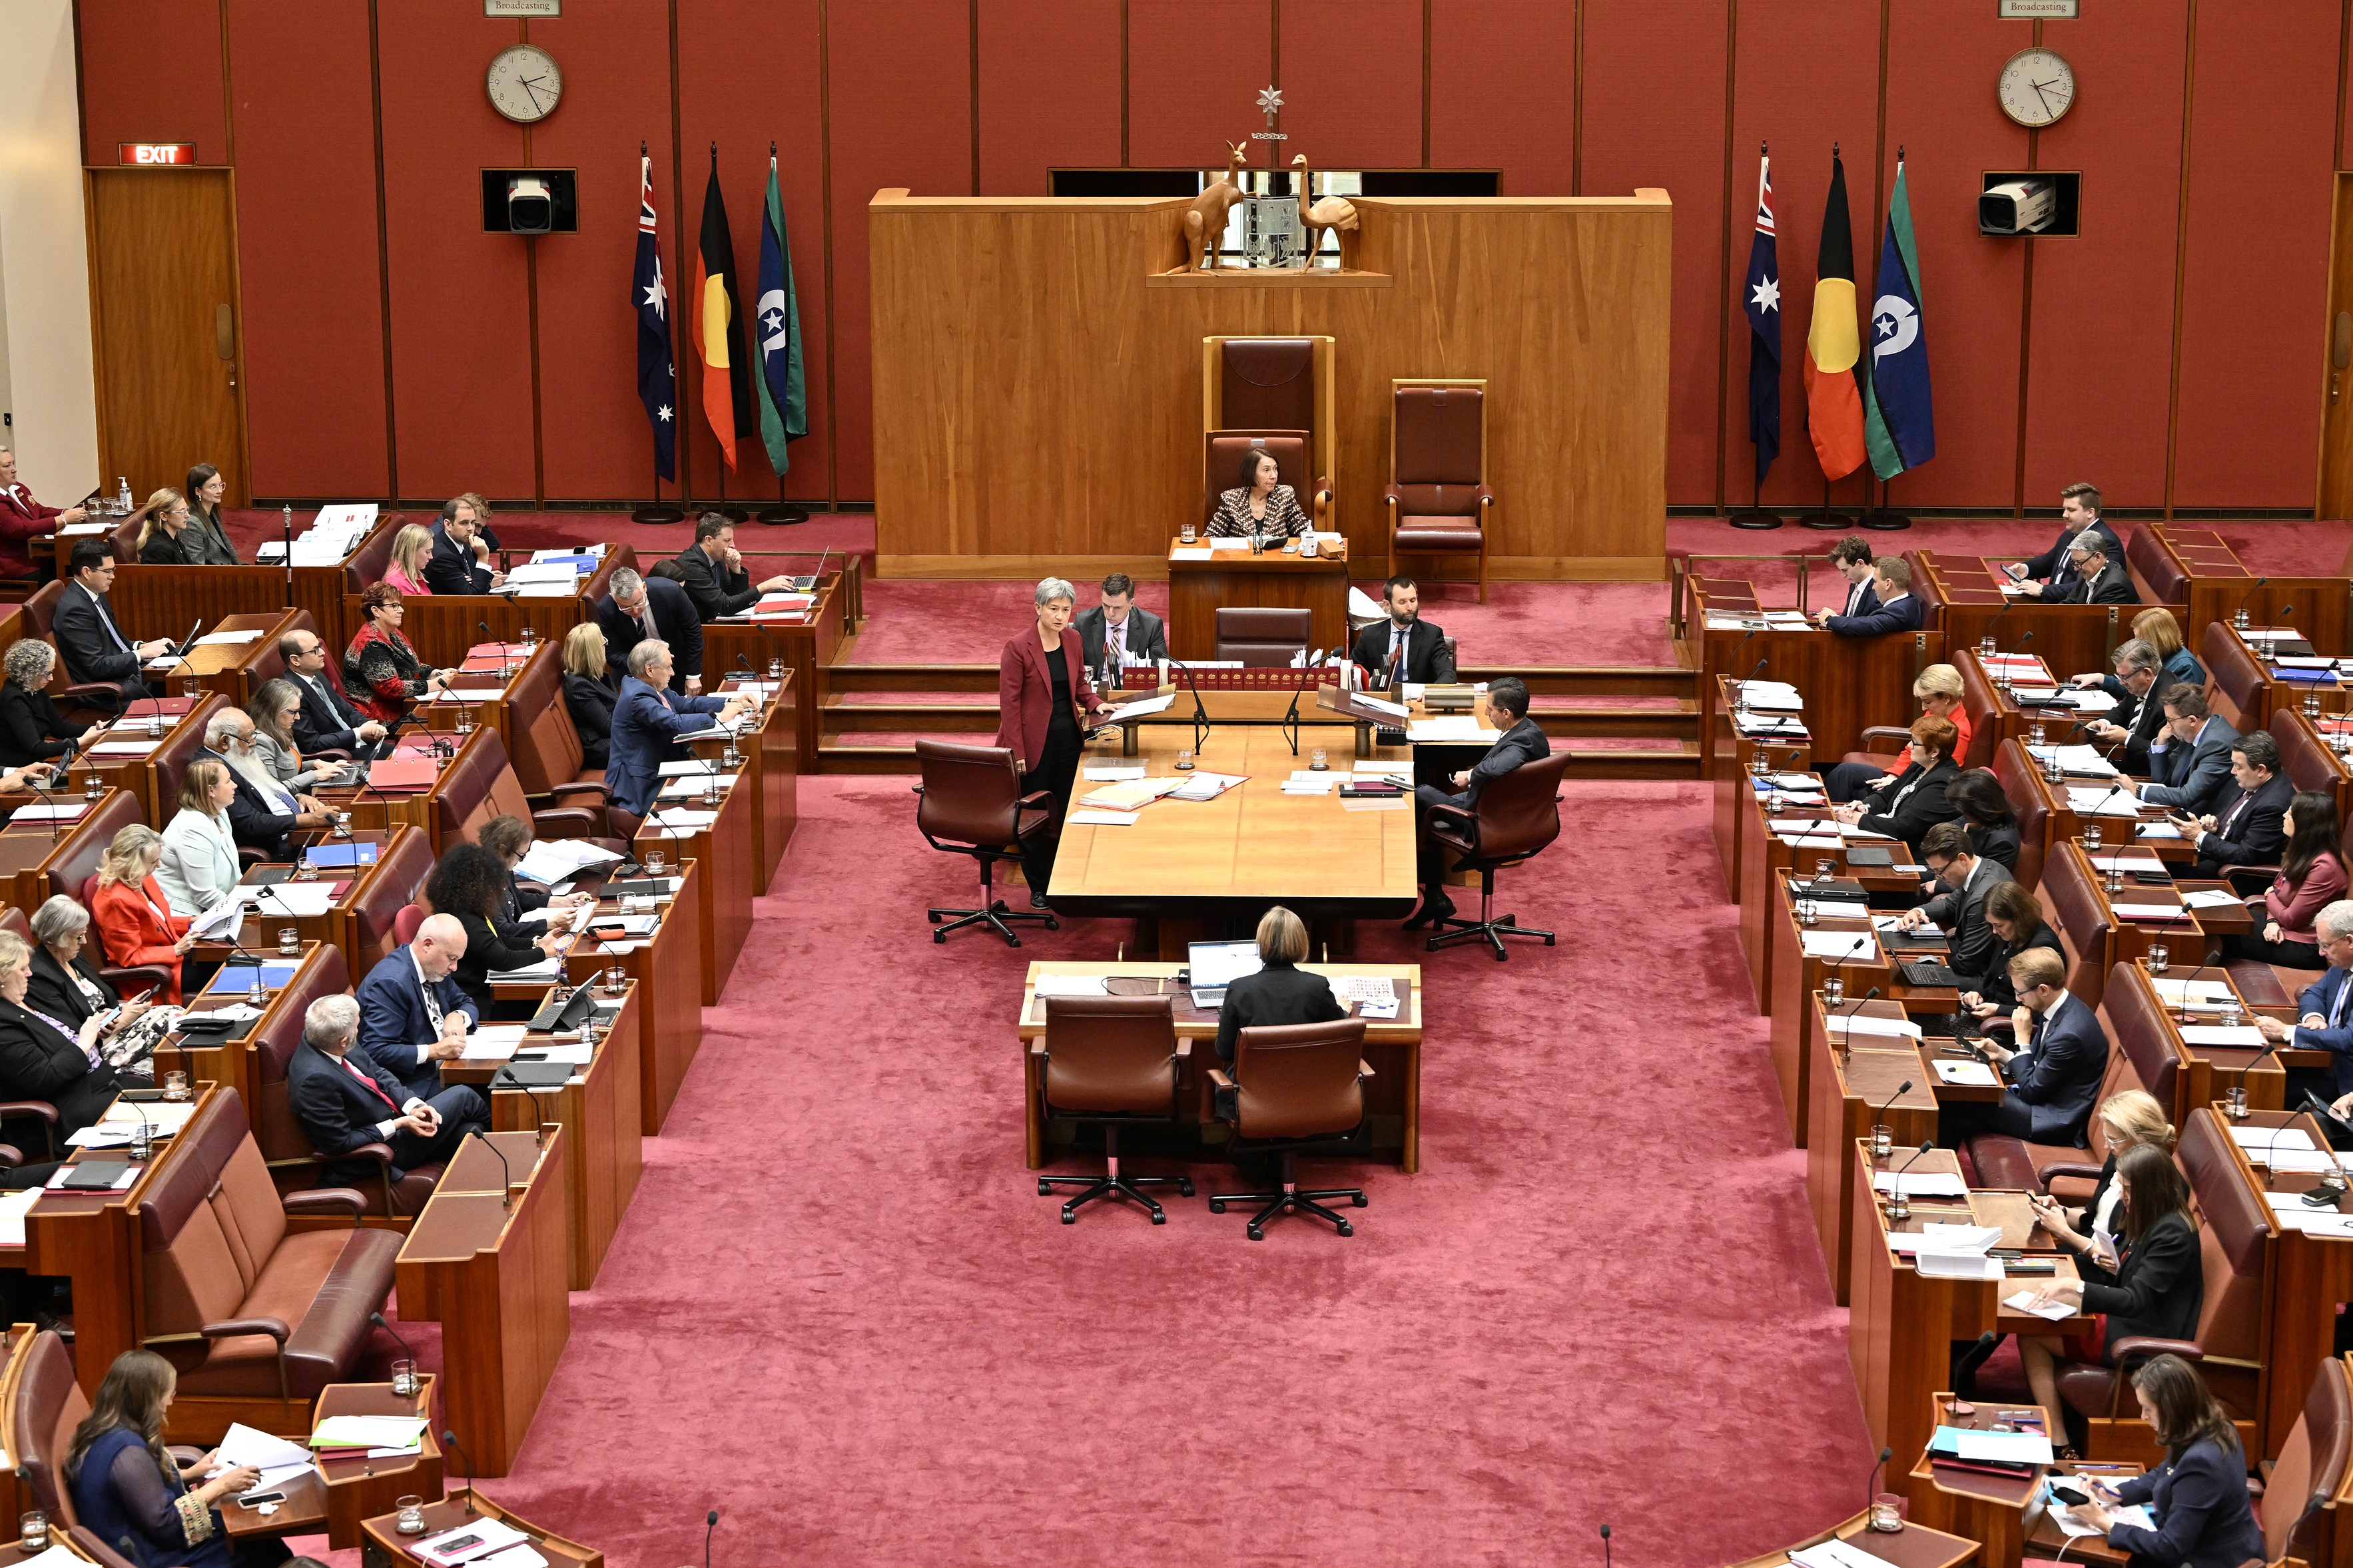 Question time in the Senate chamber